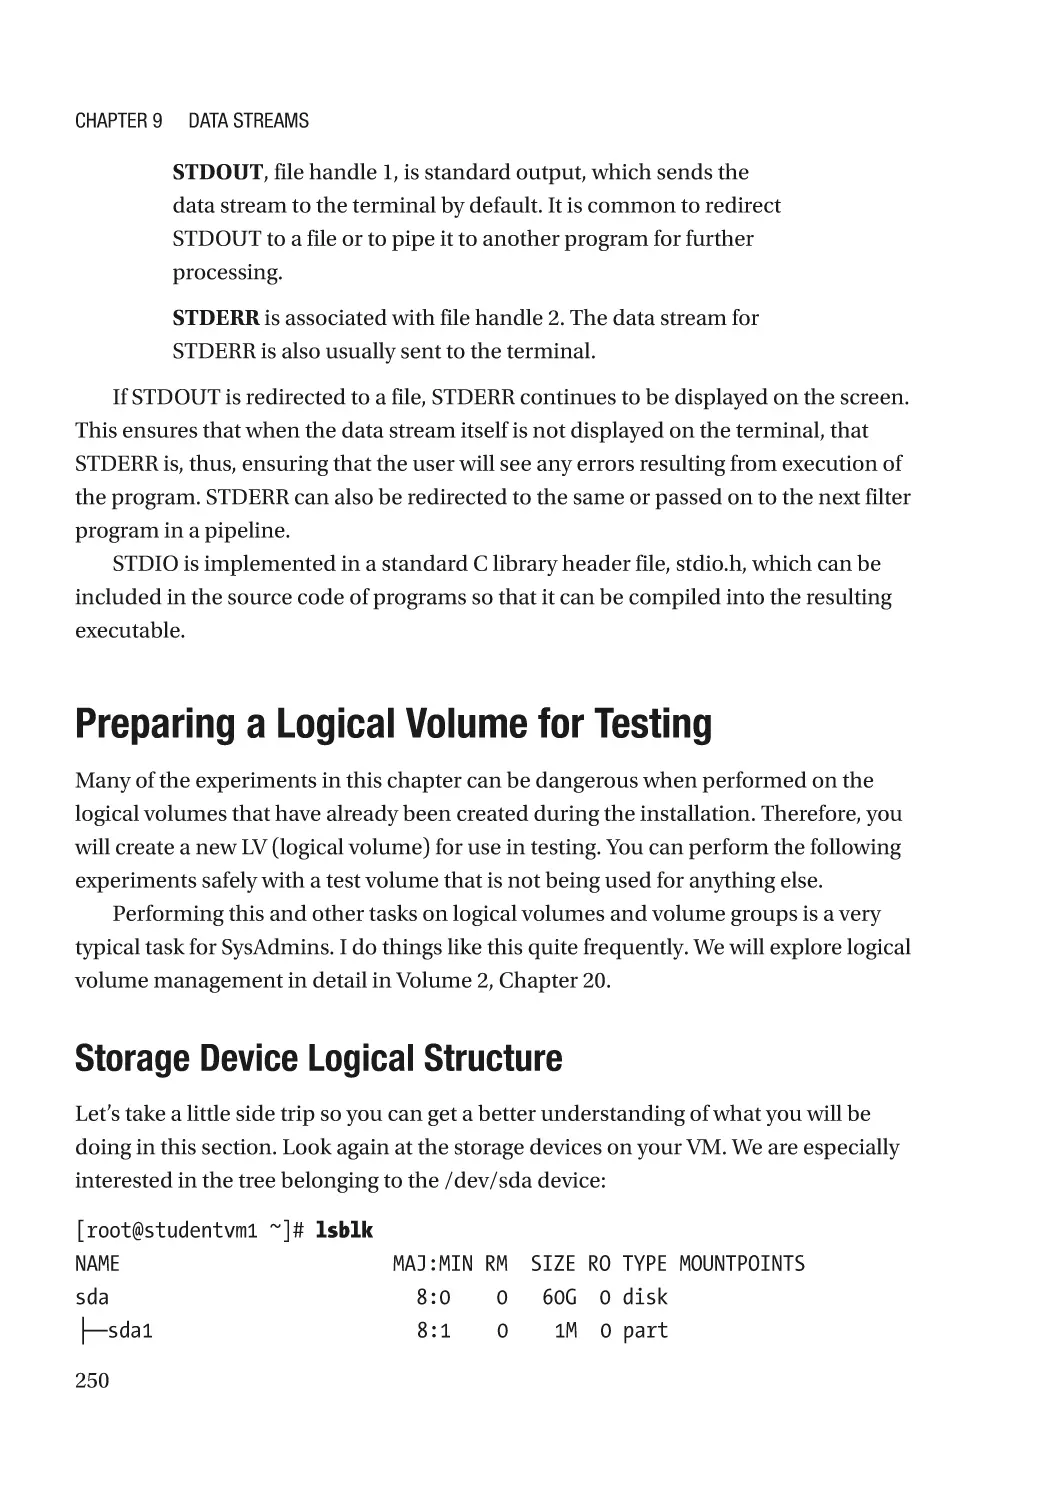 Preparing a Logical Volume for Testing
Storage Device Logical Structure